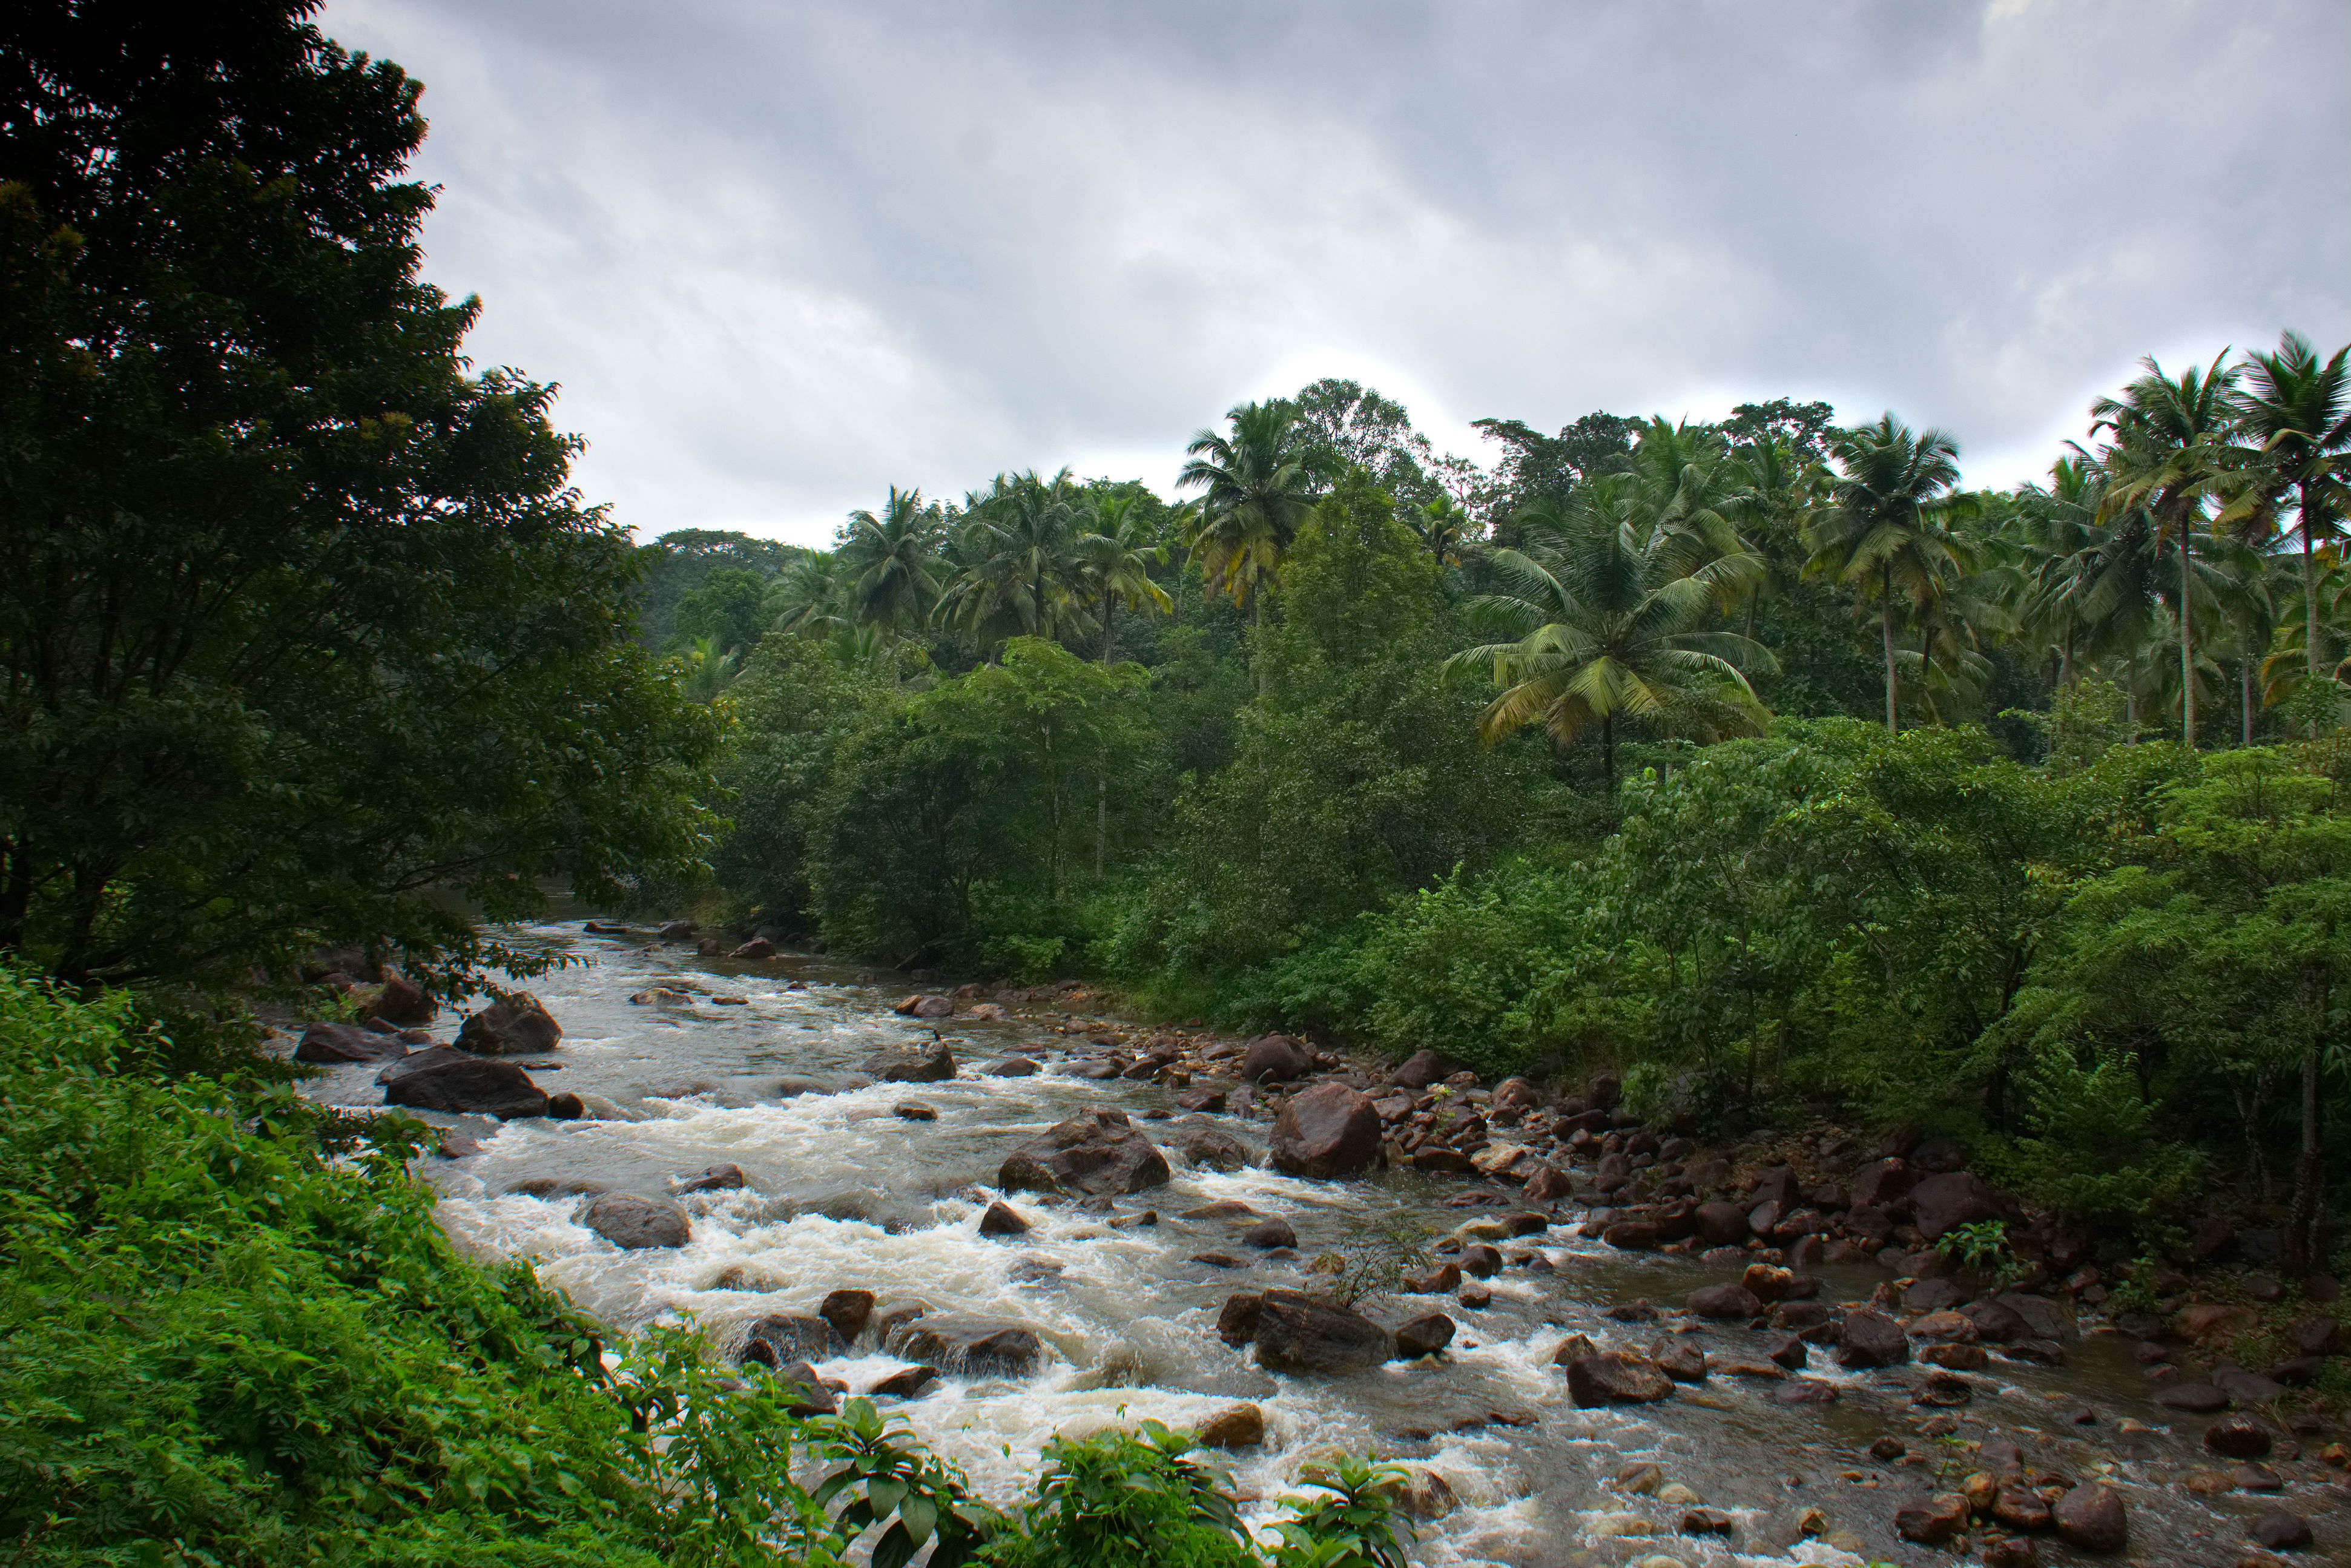 Kerala Tourism launches monsoon packages to attract travellers